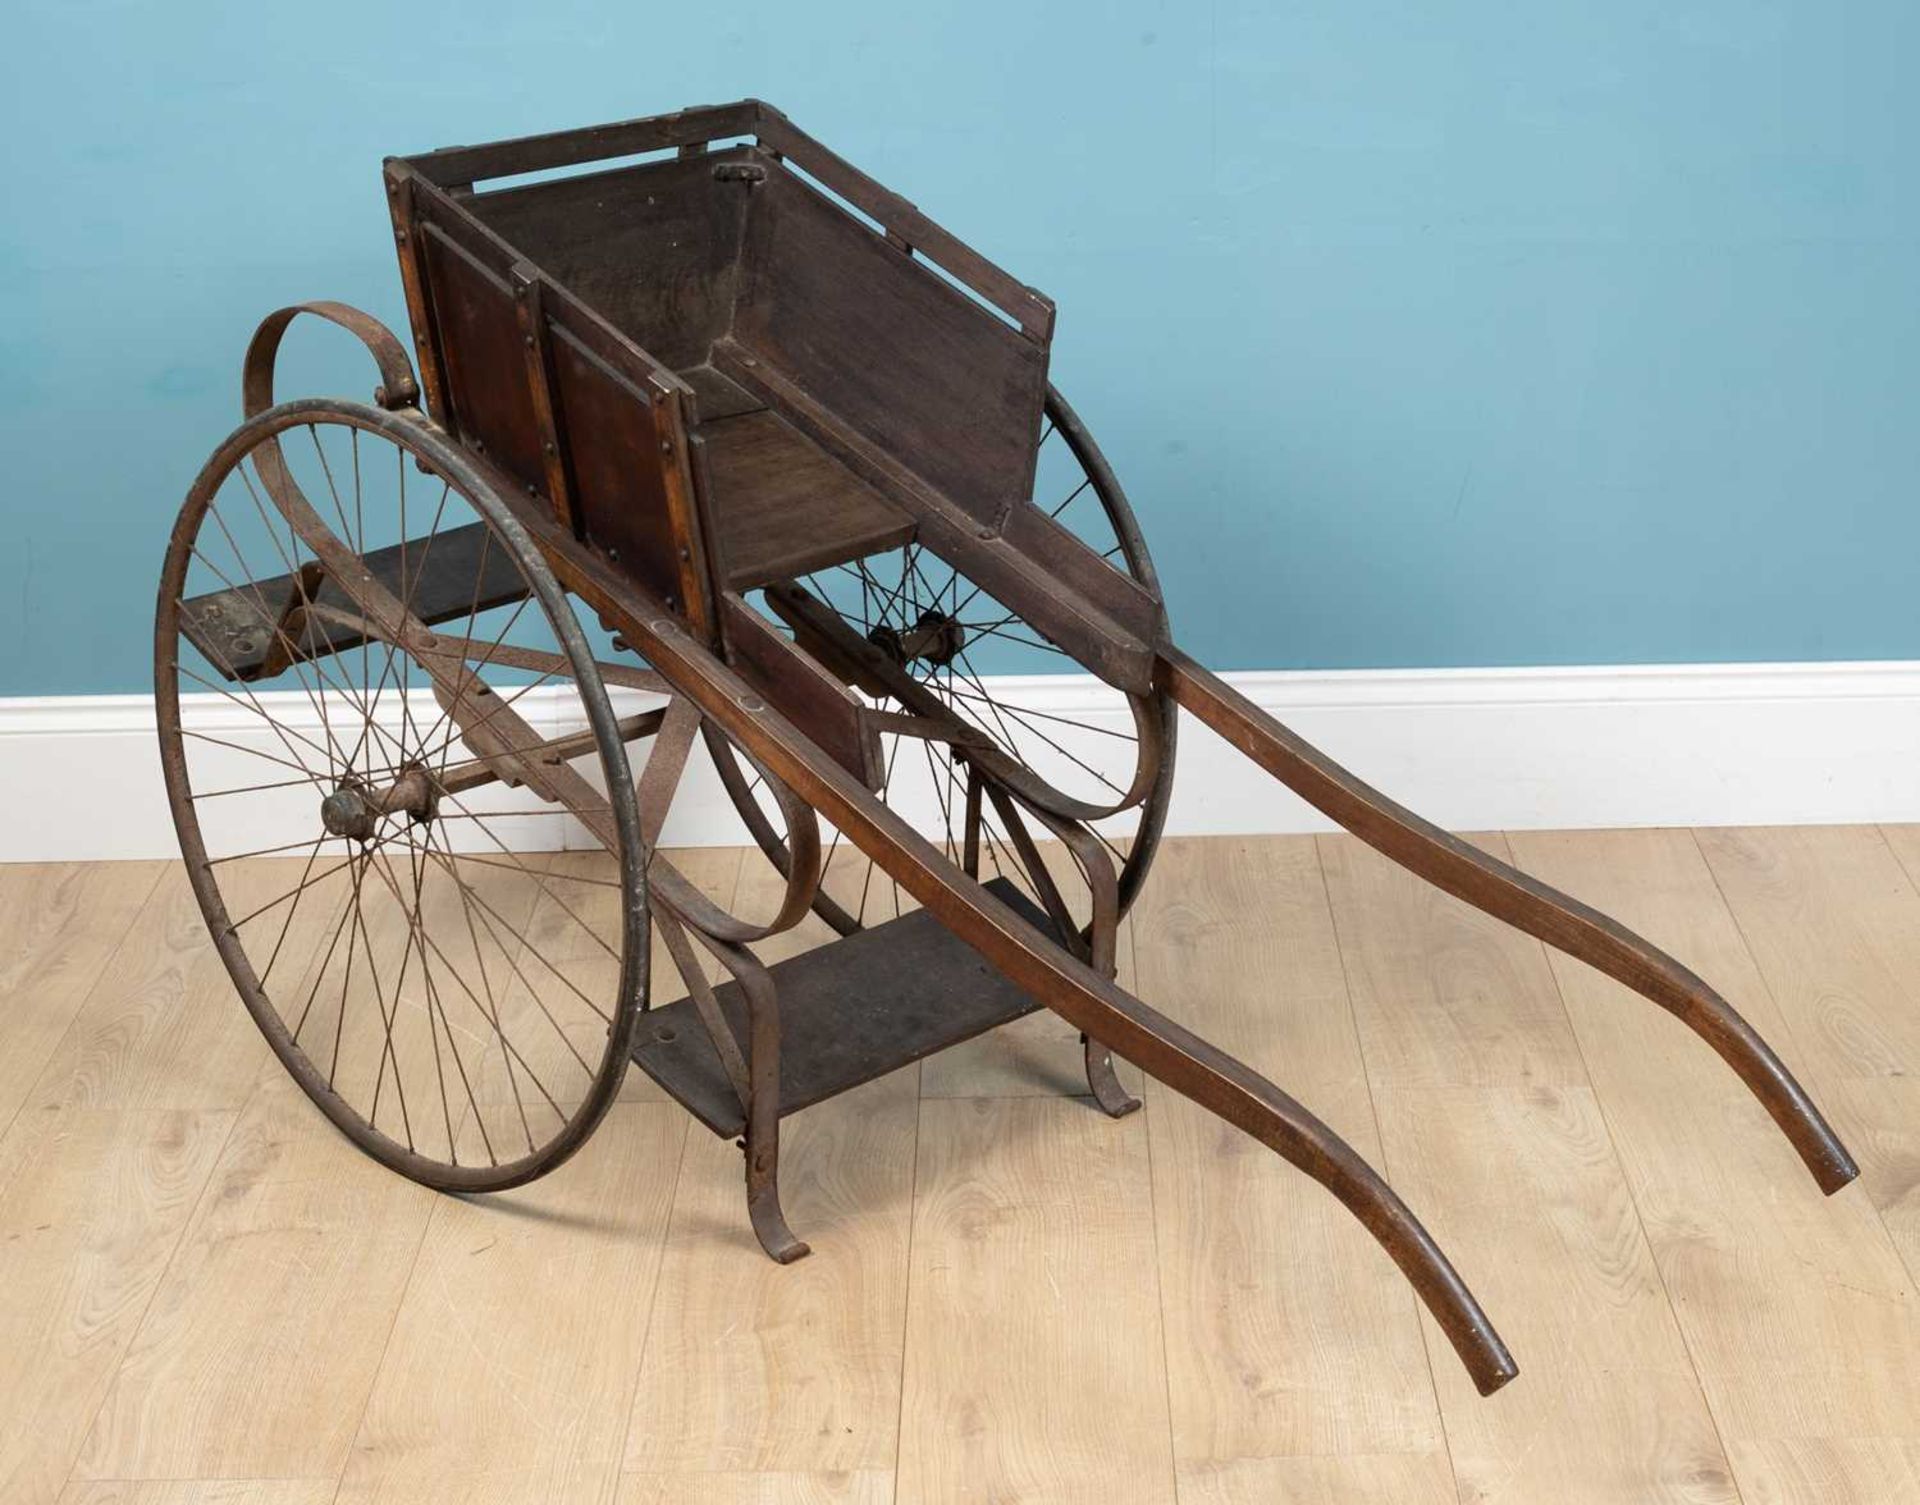 A small 19th century or Edwardian child's goat cart